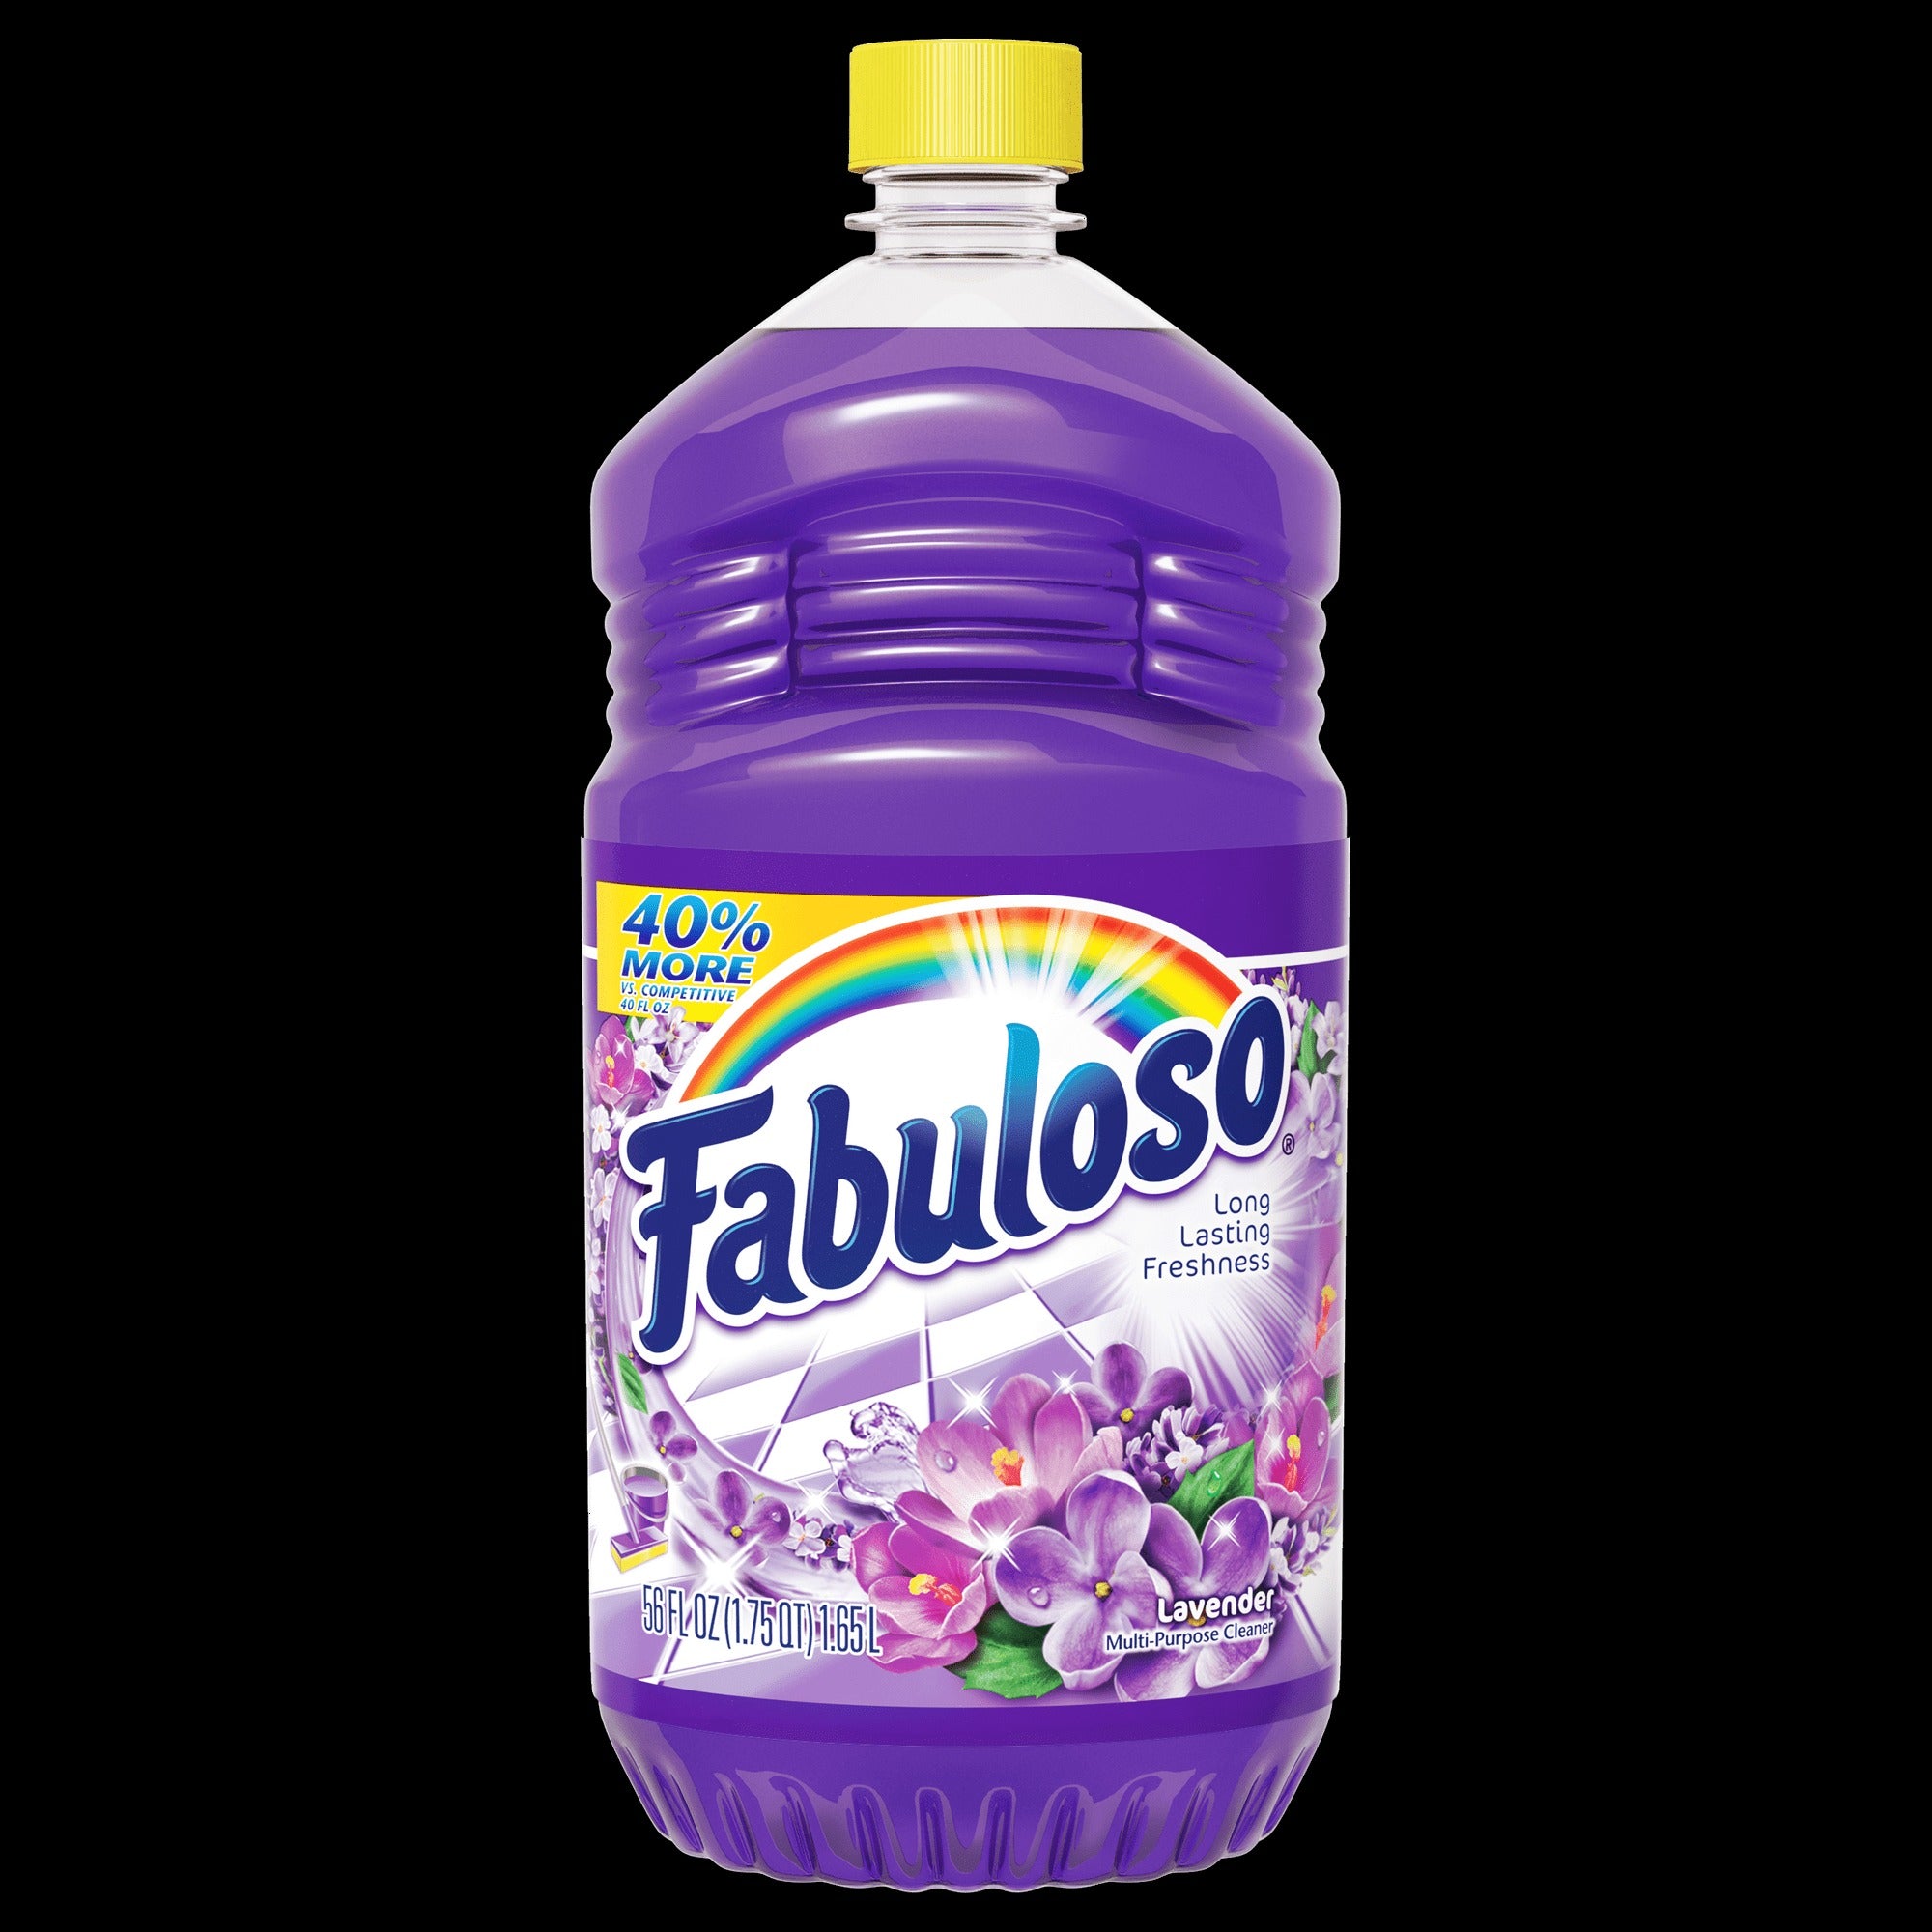 Fabuloso Multi-Purpose Cleaner, 2X Concentrated Formula, Passions of Fruit  Scent, 128 oz 